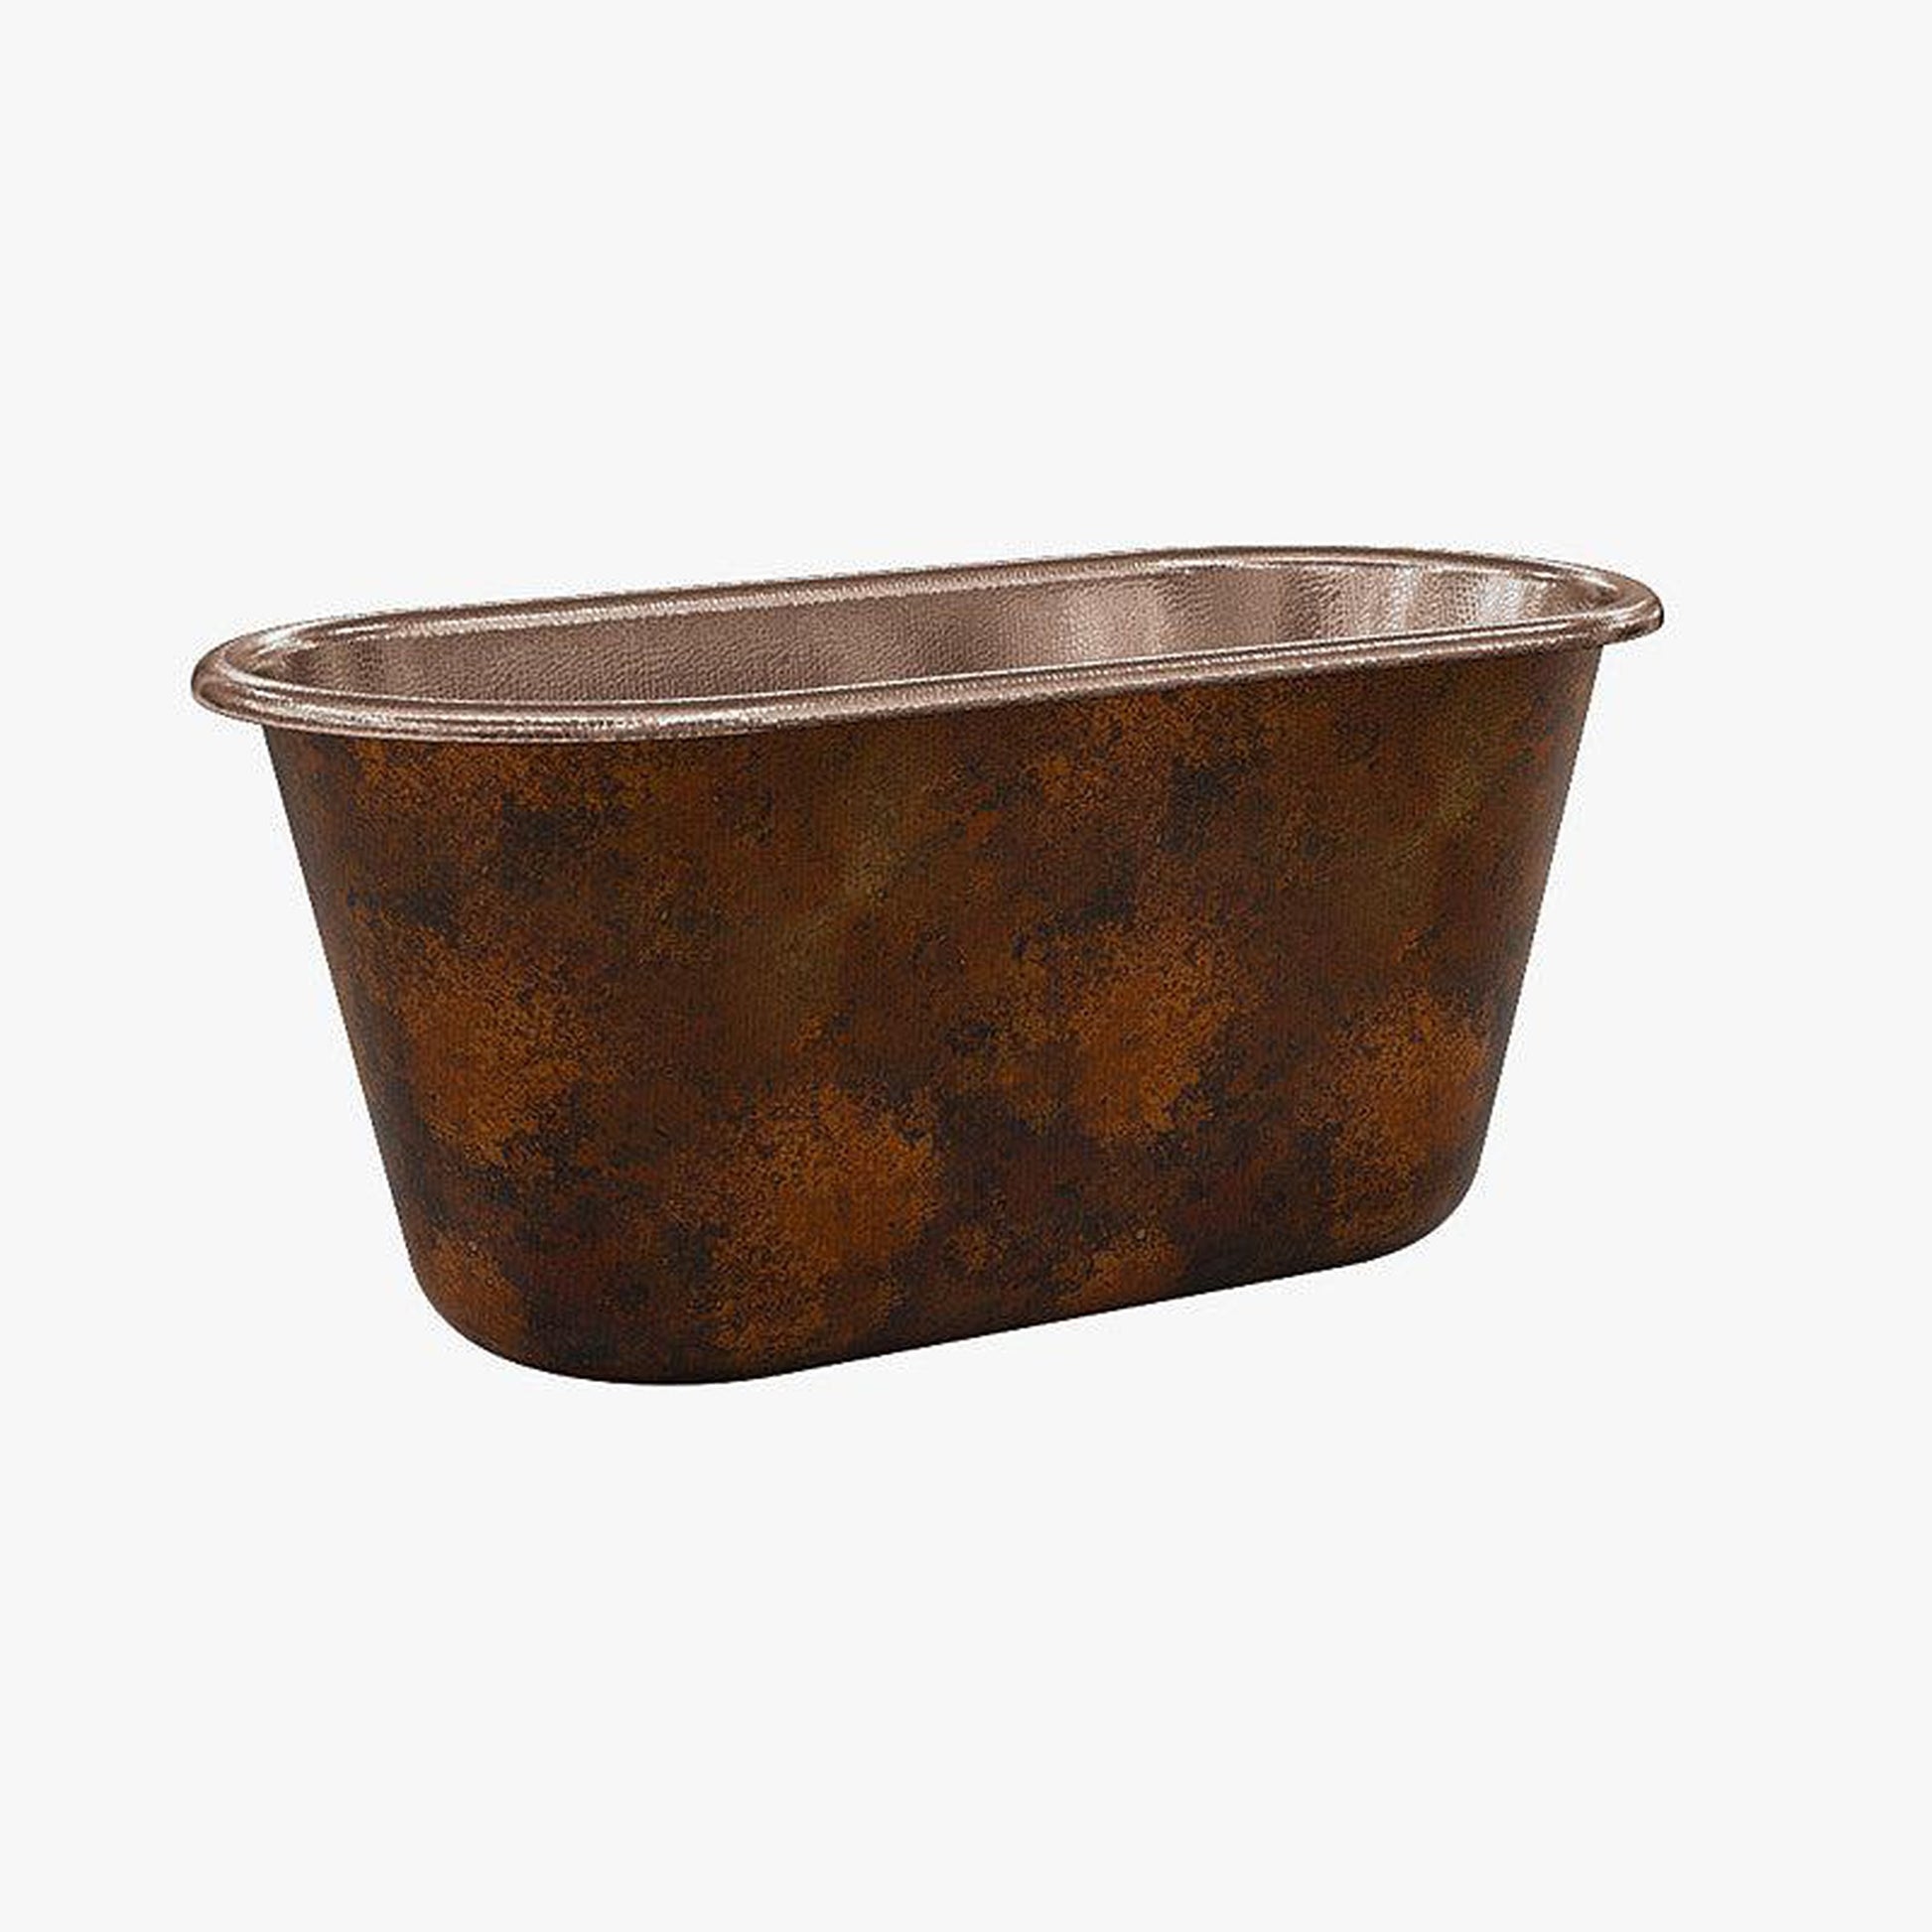 CopperSmith Heritage HX1 60" x 31" x 31" 16-Gauge Fire Copper Freestanding Bathtub With Polished Copper Interior and Oil Rubbed Bronze Push Button Tub Drain and Polished Brass Tub Filler